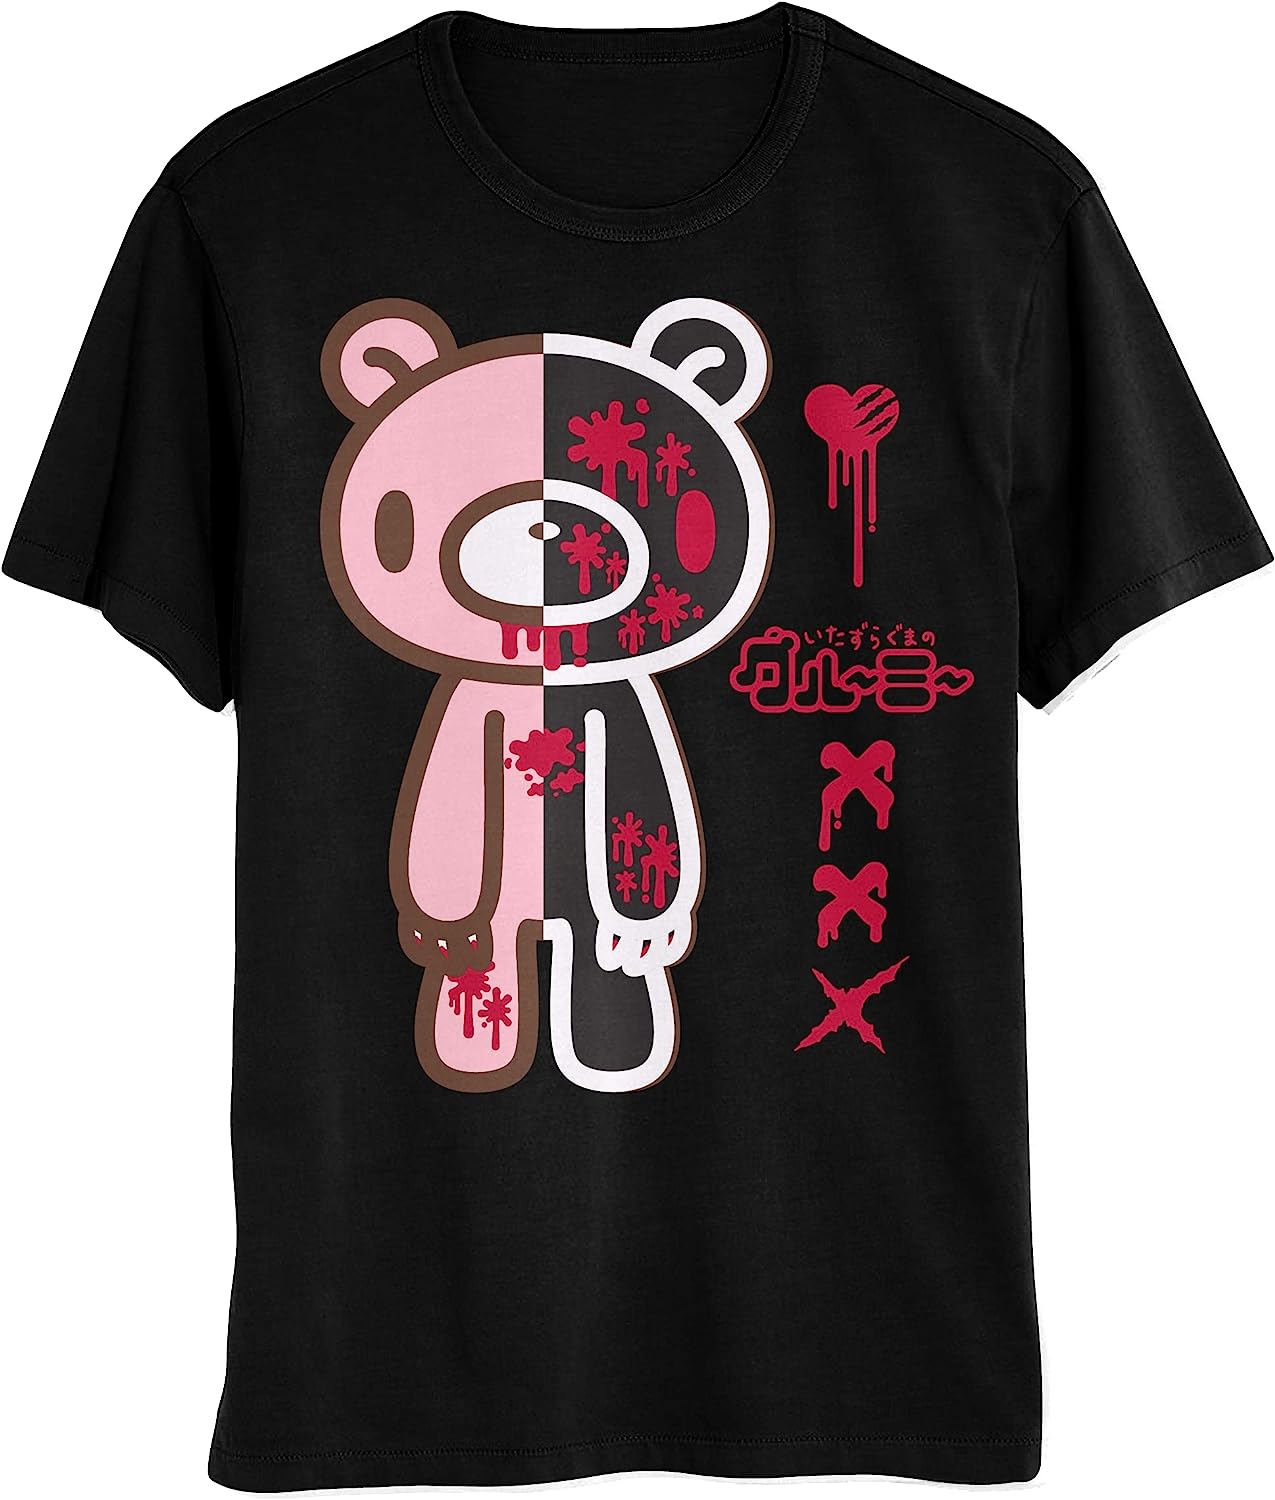 Gloomy Bear T-Shirt XL - Men’s Anime Graphic Tee with Split Bloody Design - Officially Licensed